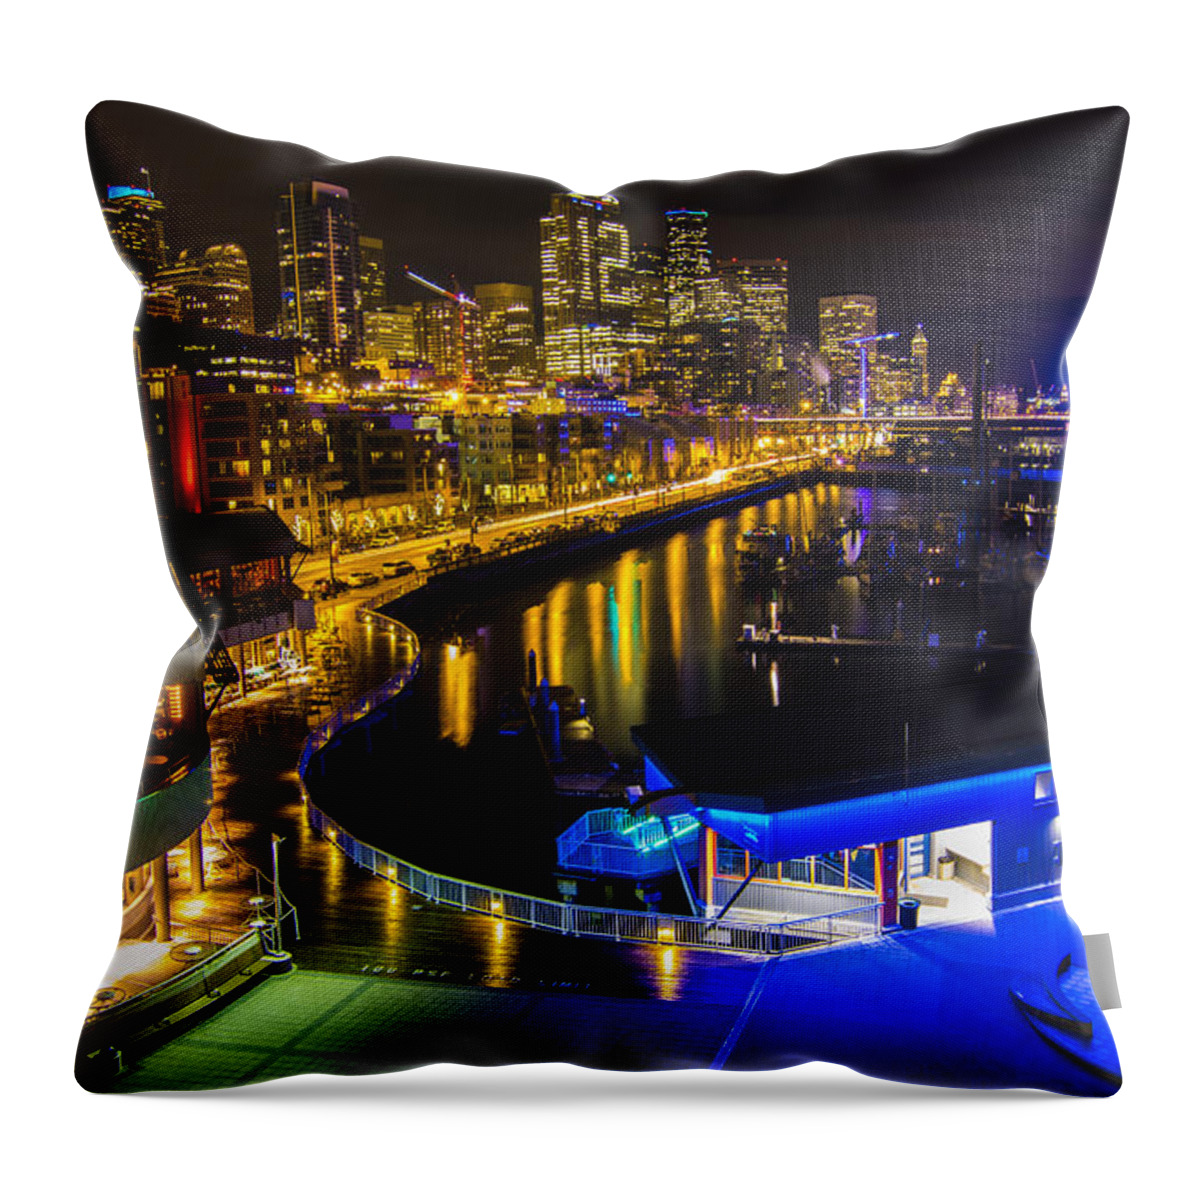 Seattle Throw Pillow featuring the photograph 12th Man On The Seattle Waterfront by Matt McDonald